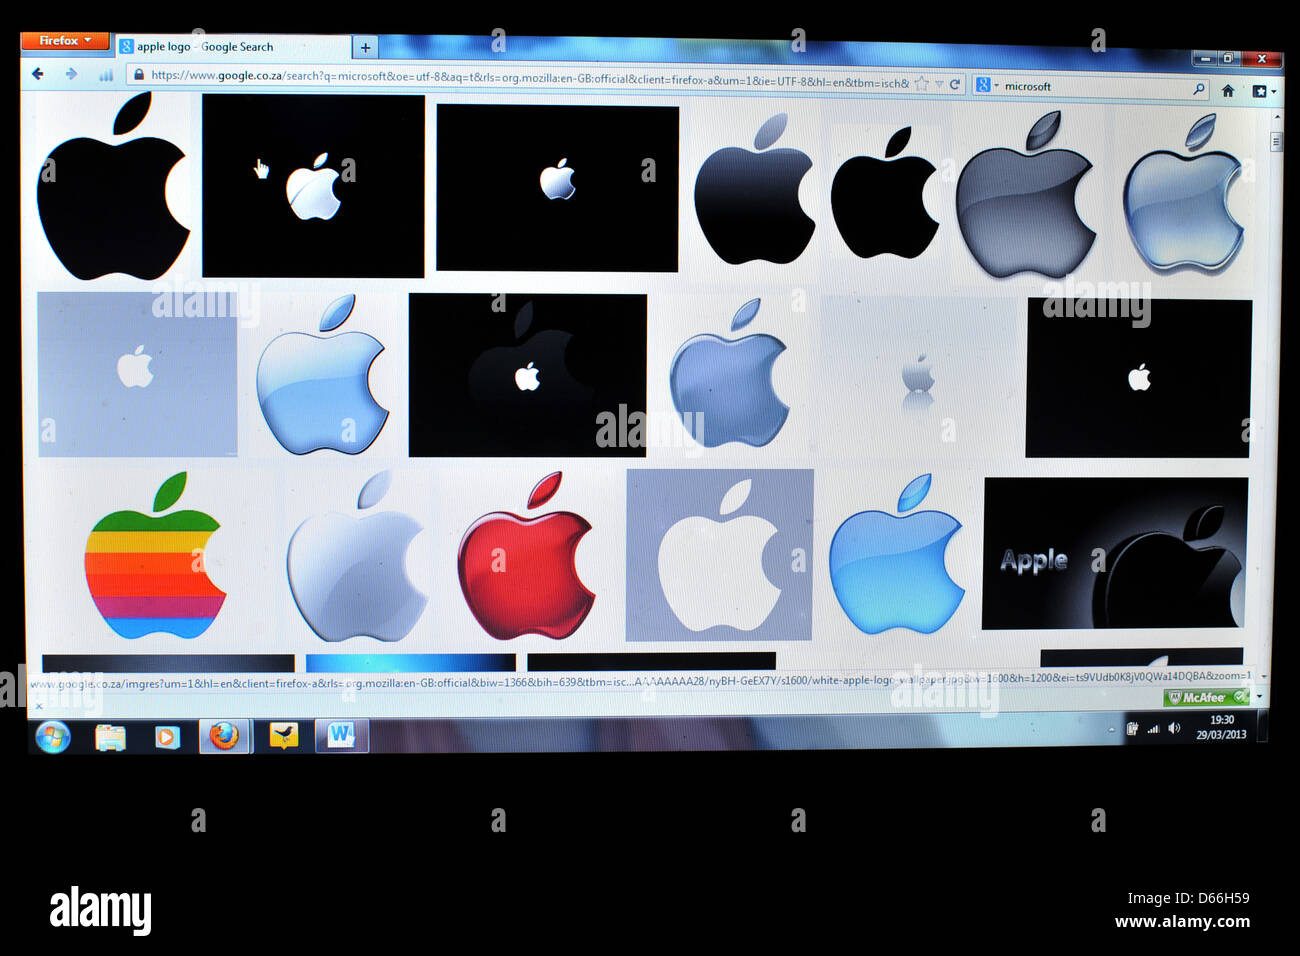 Image of a laptop screen showing the results of a Google image search for the Apple computer company. Stock Photo